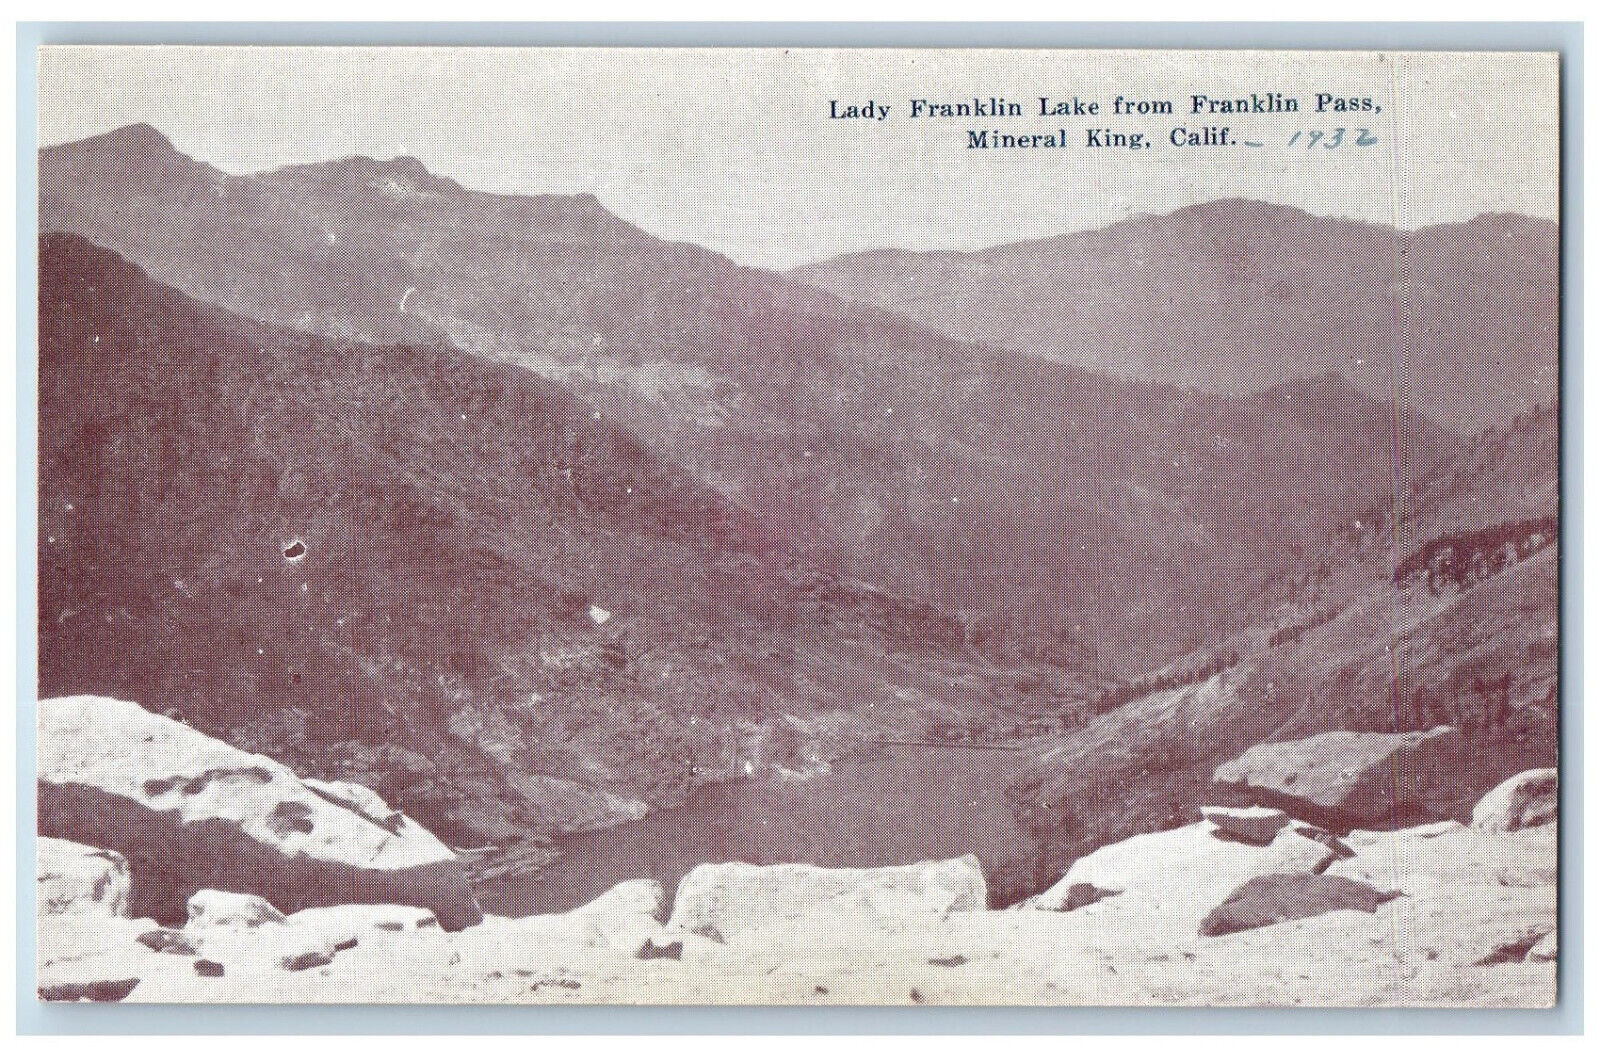 Mineral King California CA Postcard Lady Franklin Lake from Franklin Pass 1932